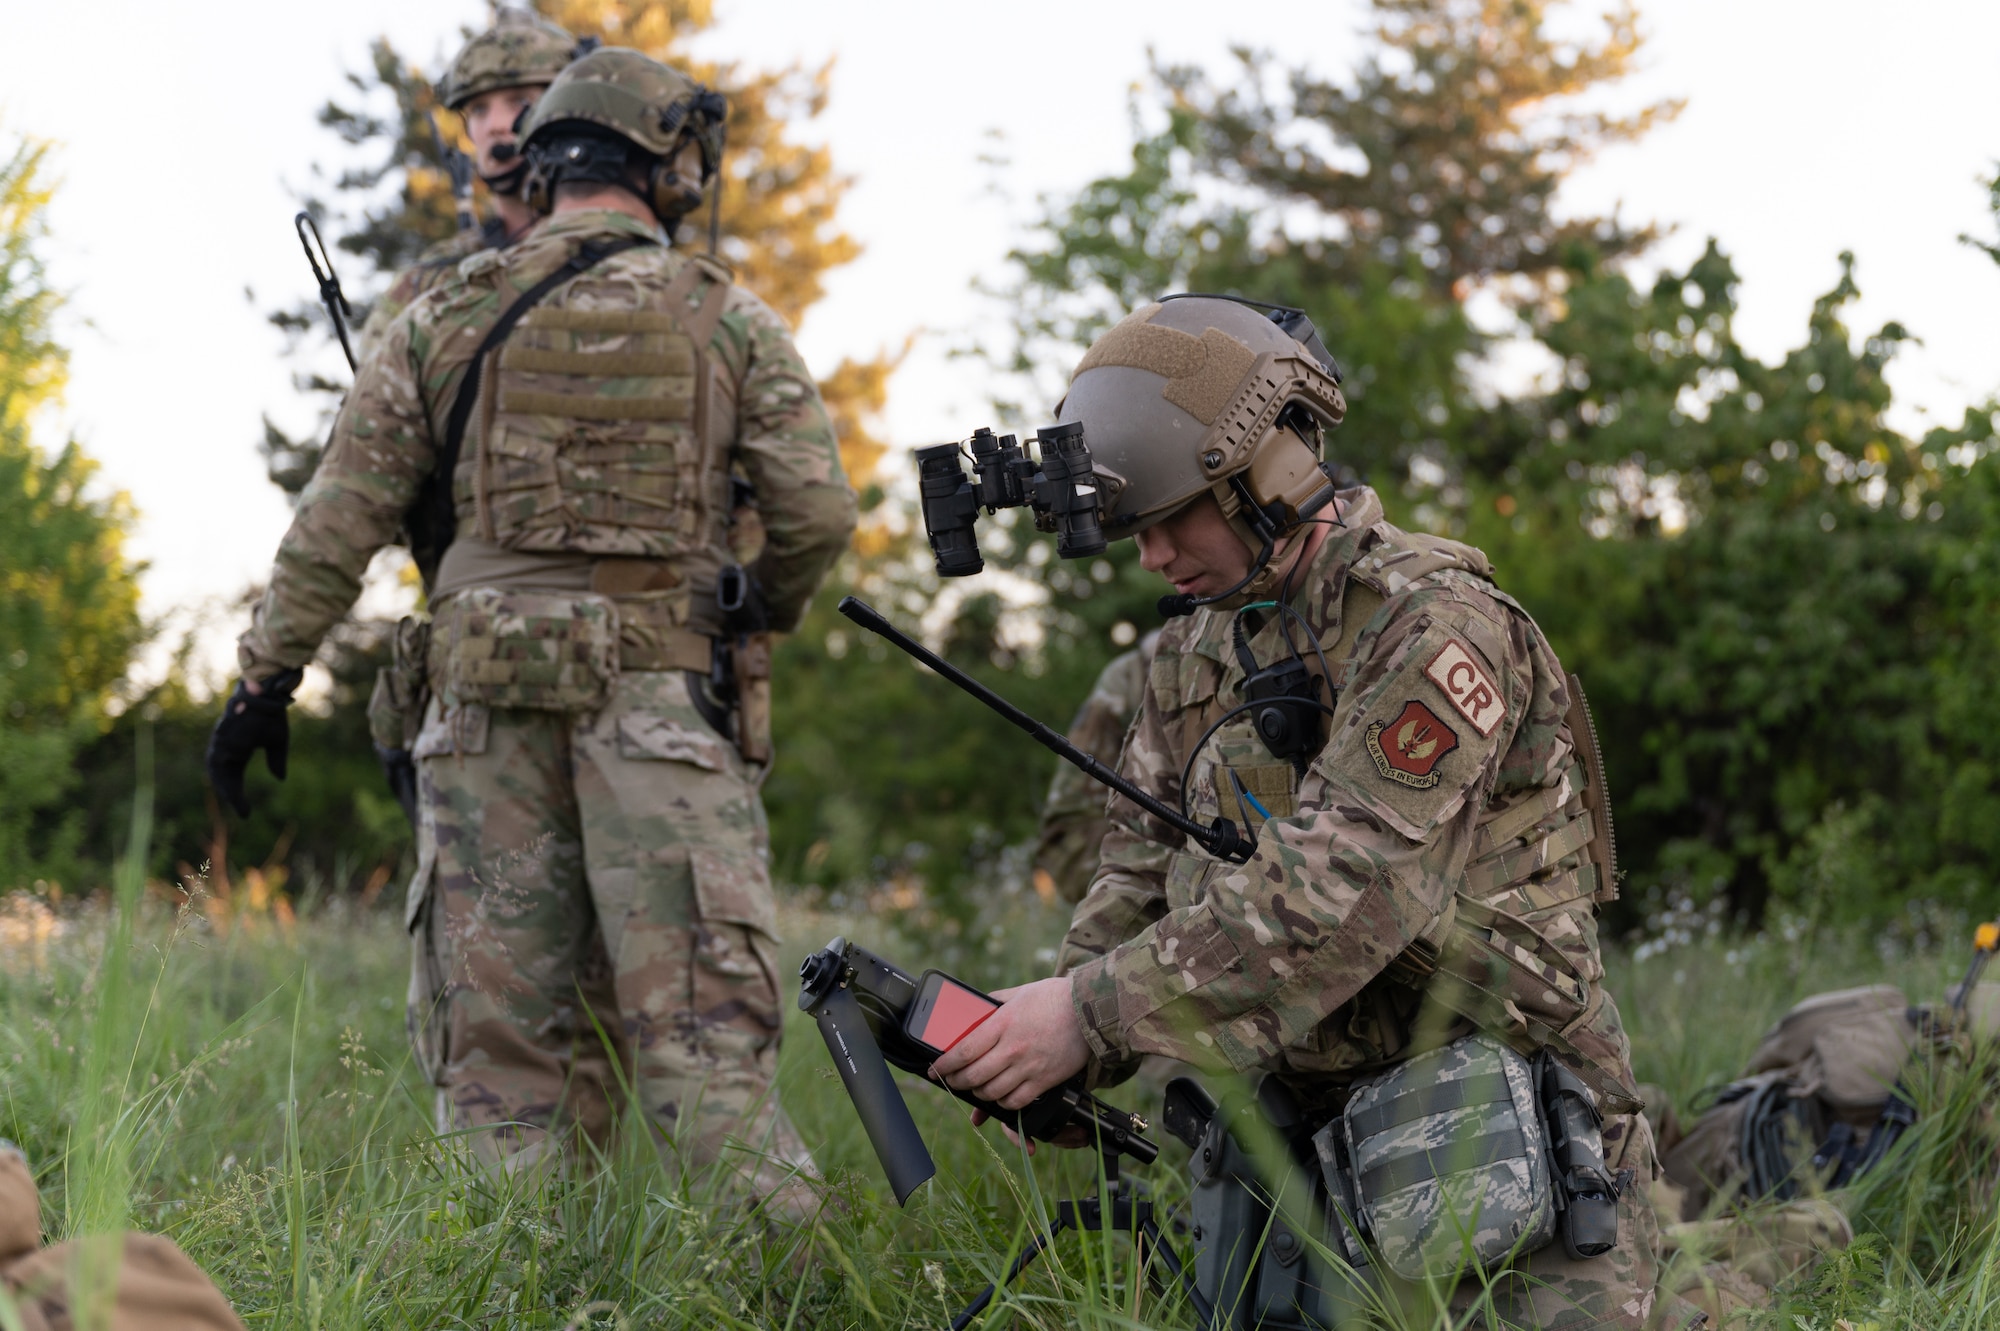 An Airman setting up communications equipment in a field.